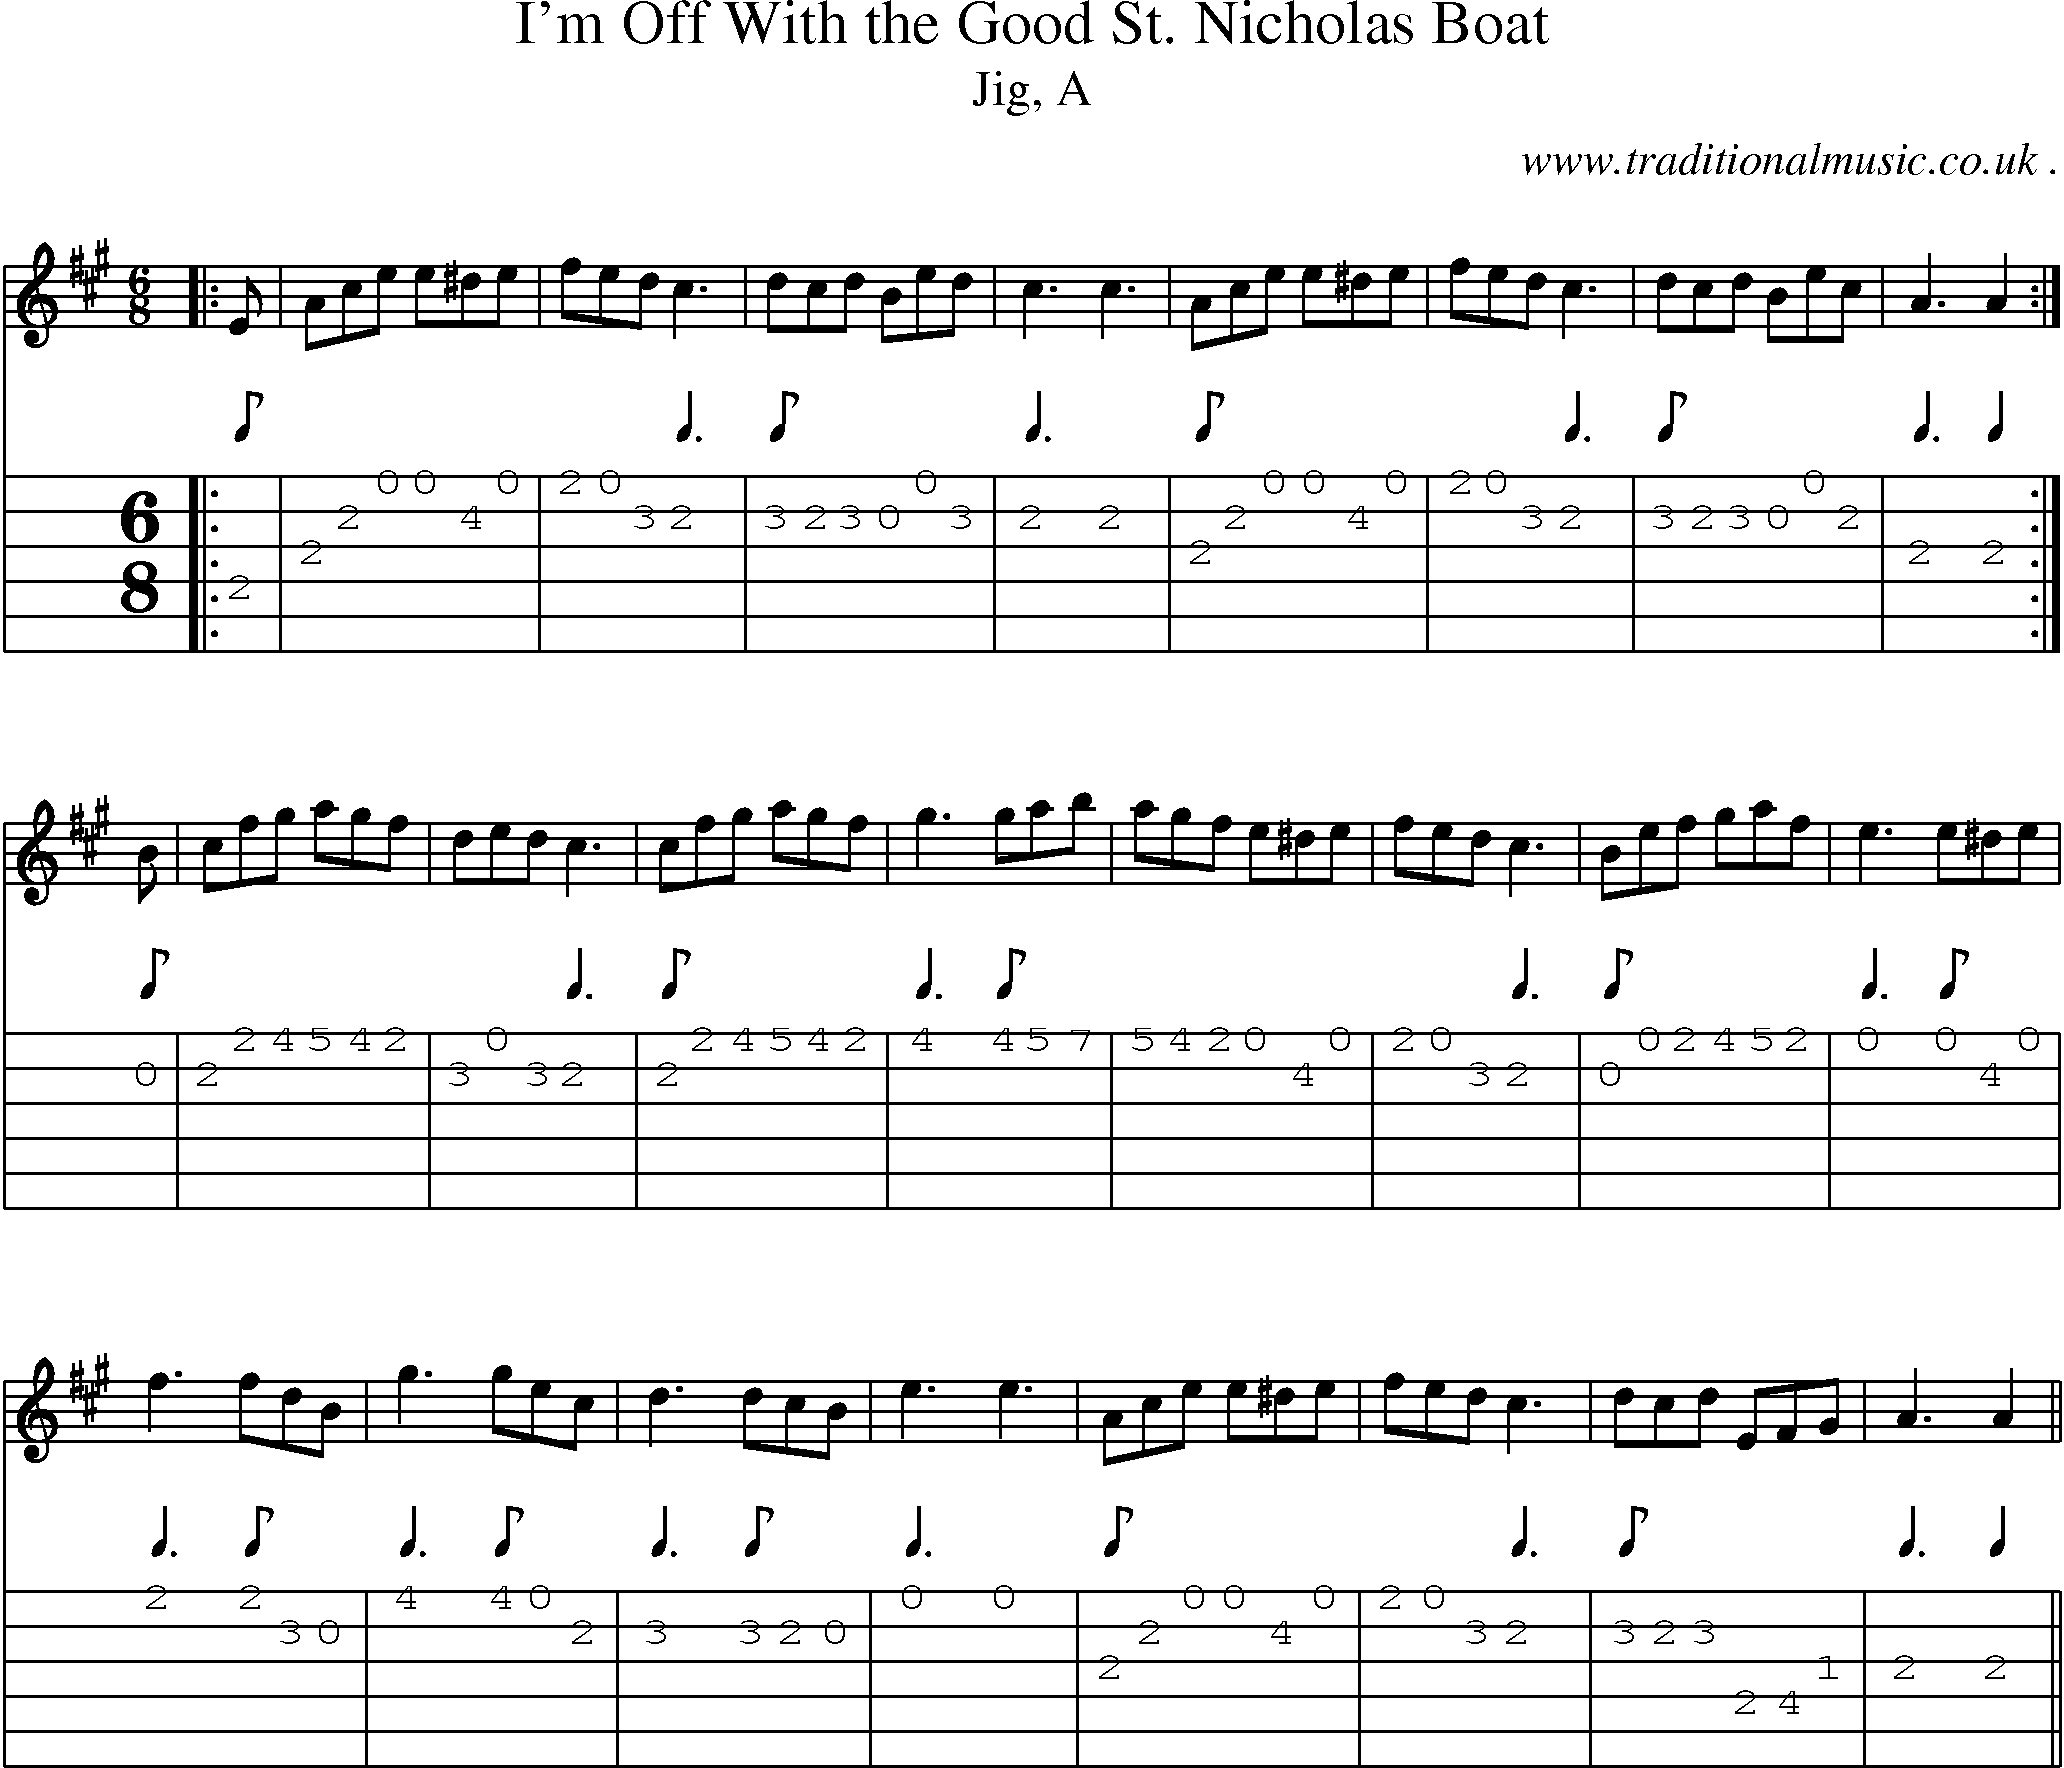 Sheet-music  score, Chords and Guitar Tabs for Im Off With The Good St Nicholas Boat